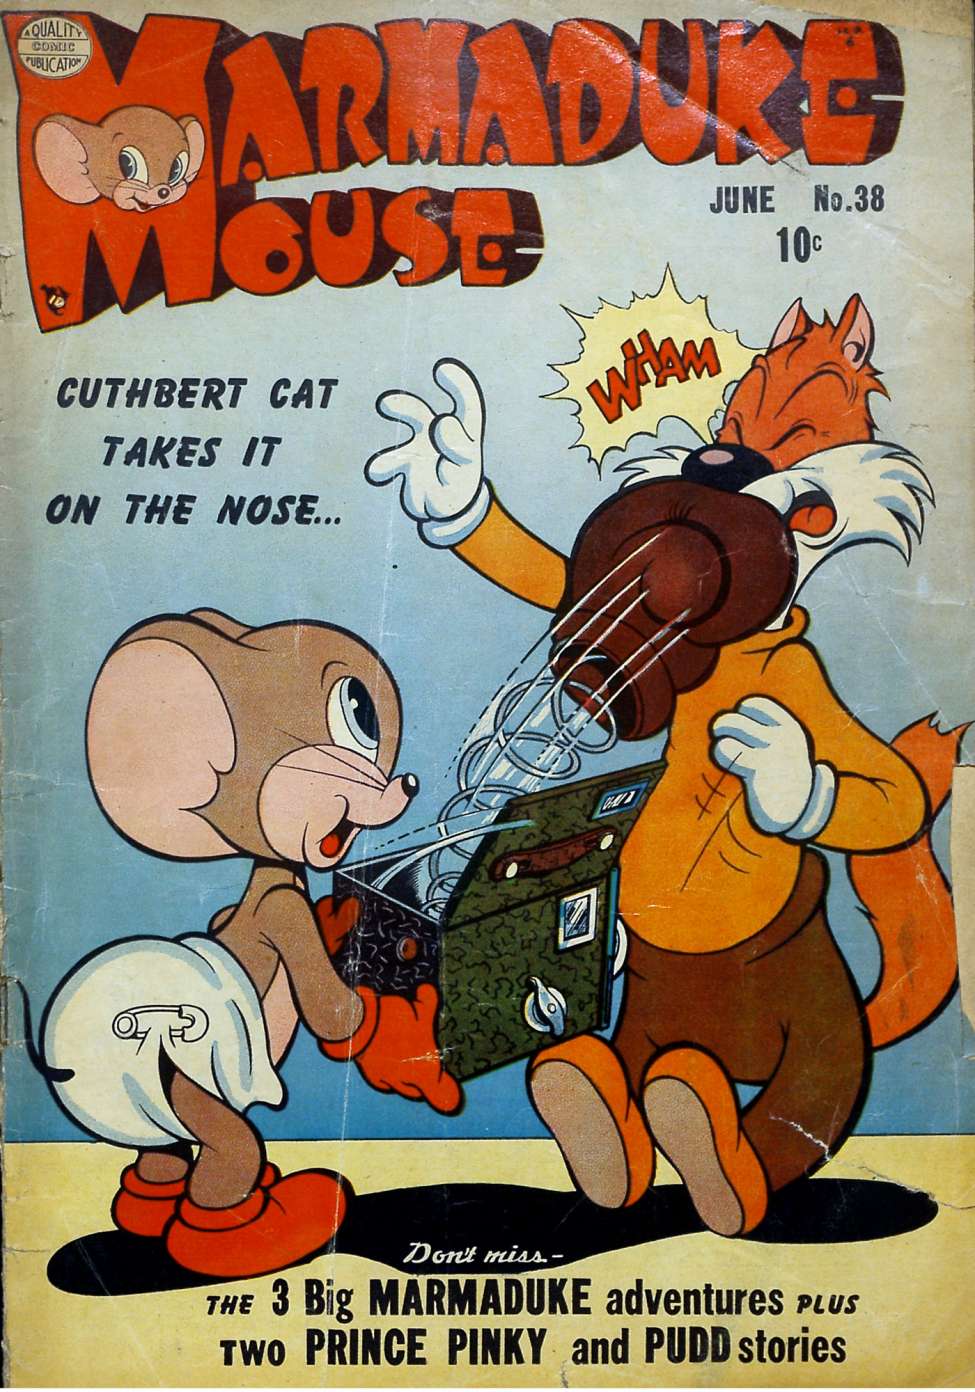 Book Cover For Marmaduke Mouse 38